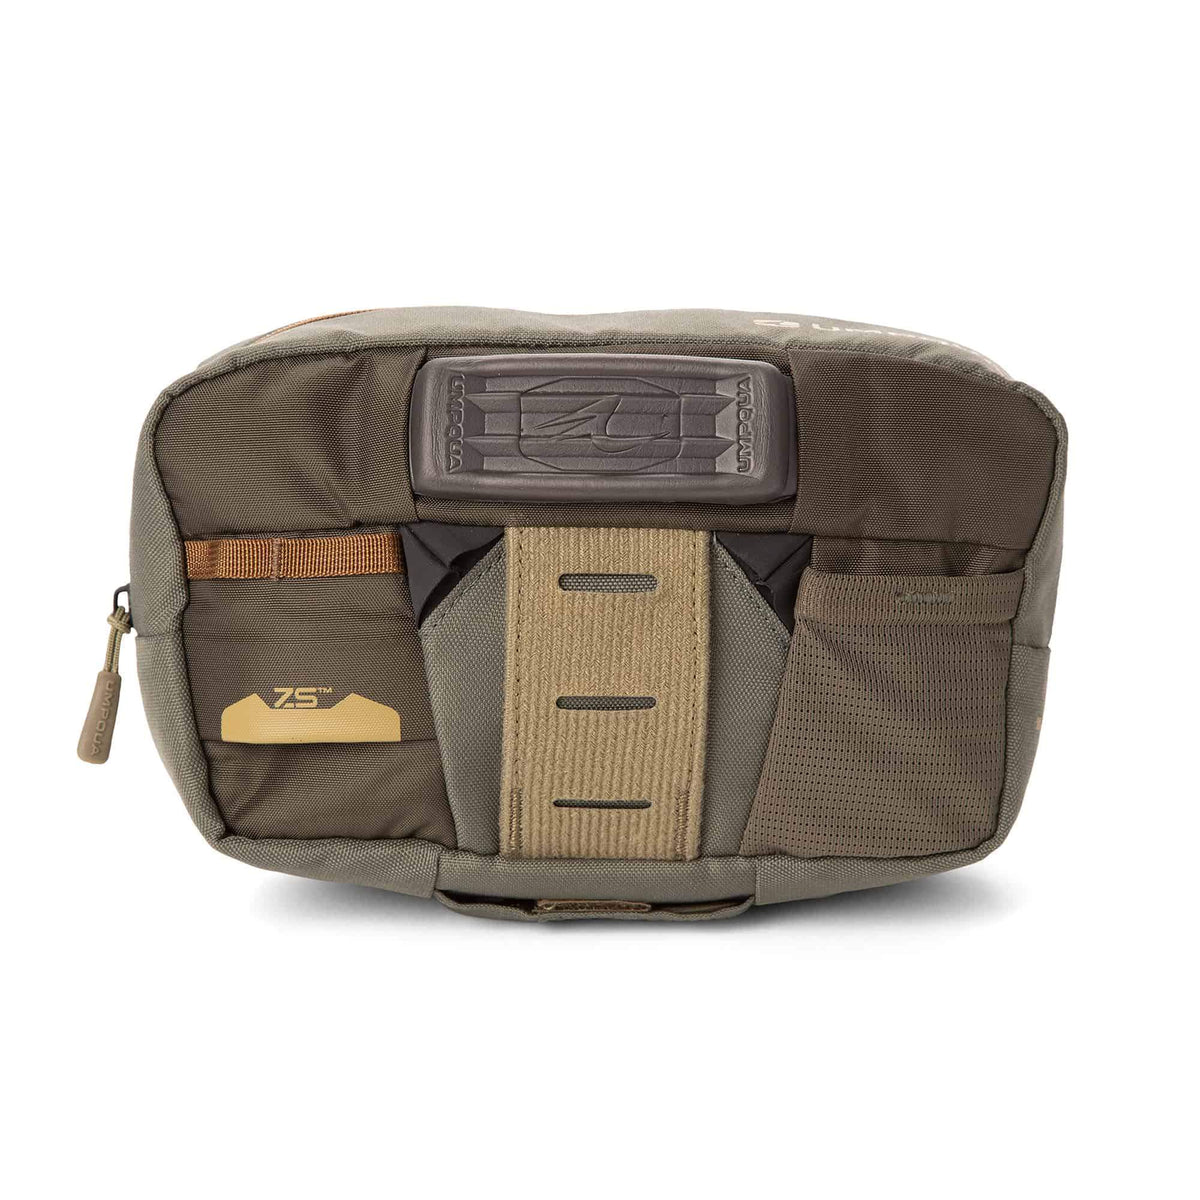 Umpqua ZS2 Wader Fishing Chest Pack Olive Front